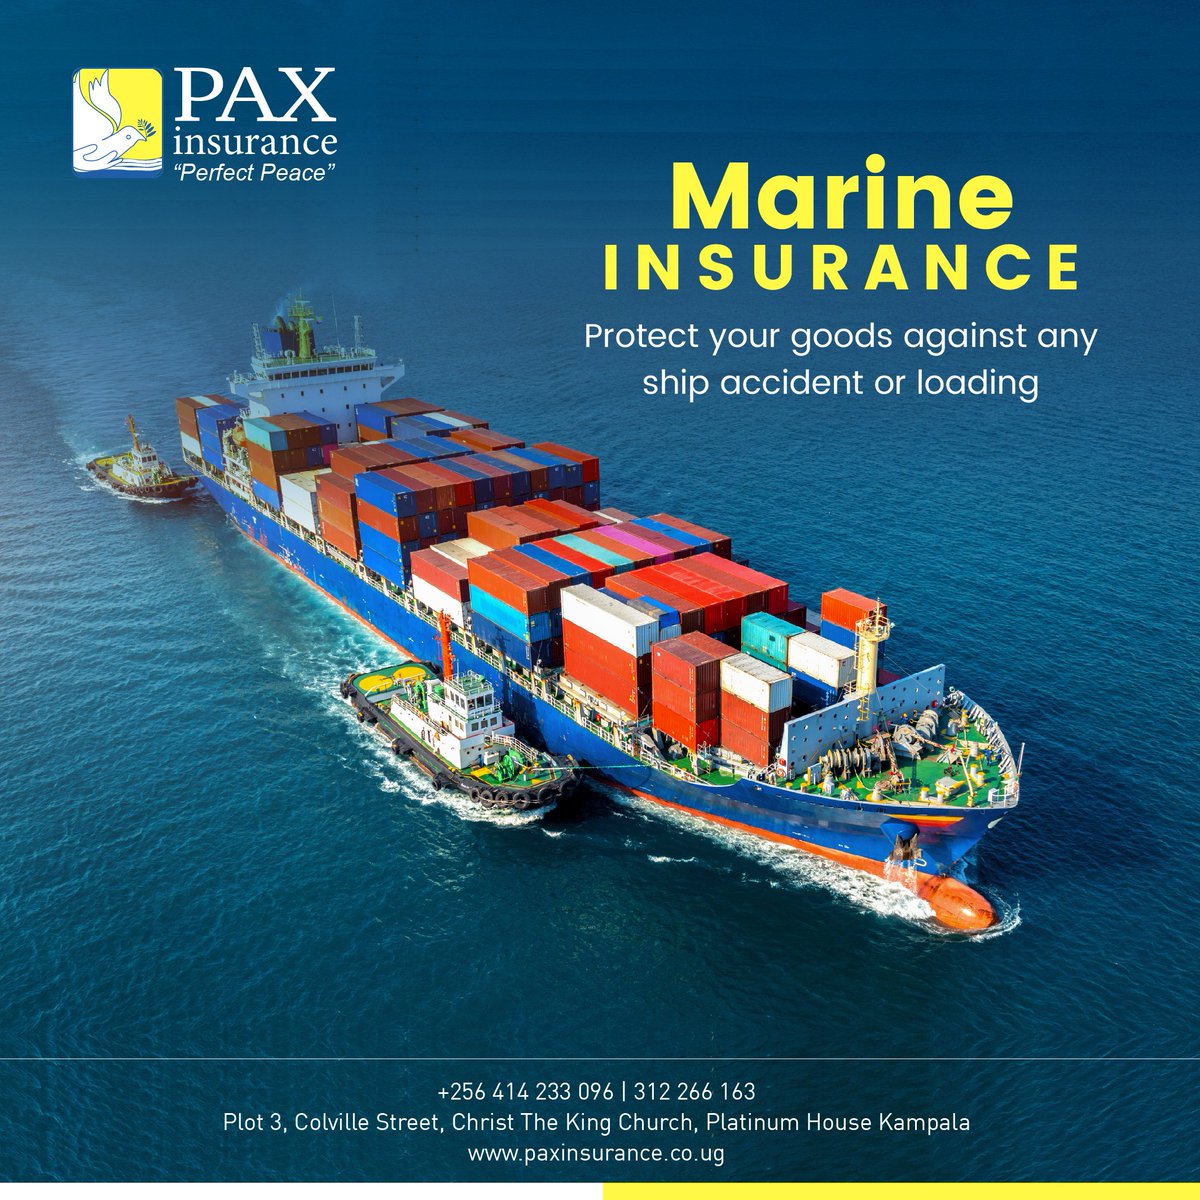 Sail your goods with confidence and protection of your voyage with our reliable #marineinsurance! 🌊⛵️🚢 

Call our agents on +256 312 266 163

#marineinsurance #seafaring #voyage #protection #peaceofmind #insurance #safetyatsea